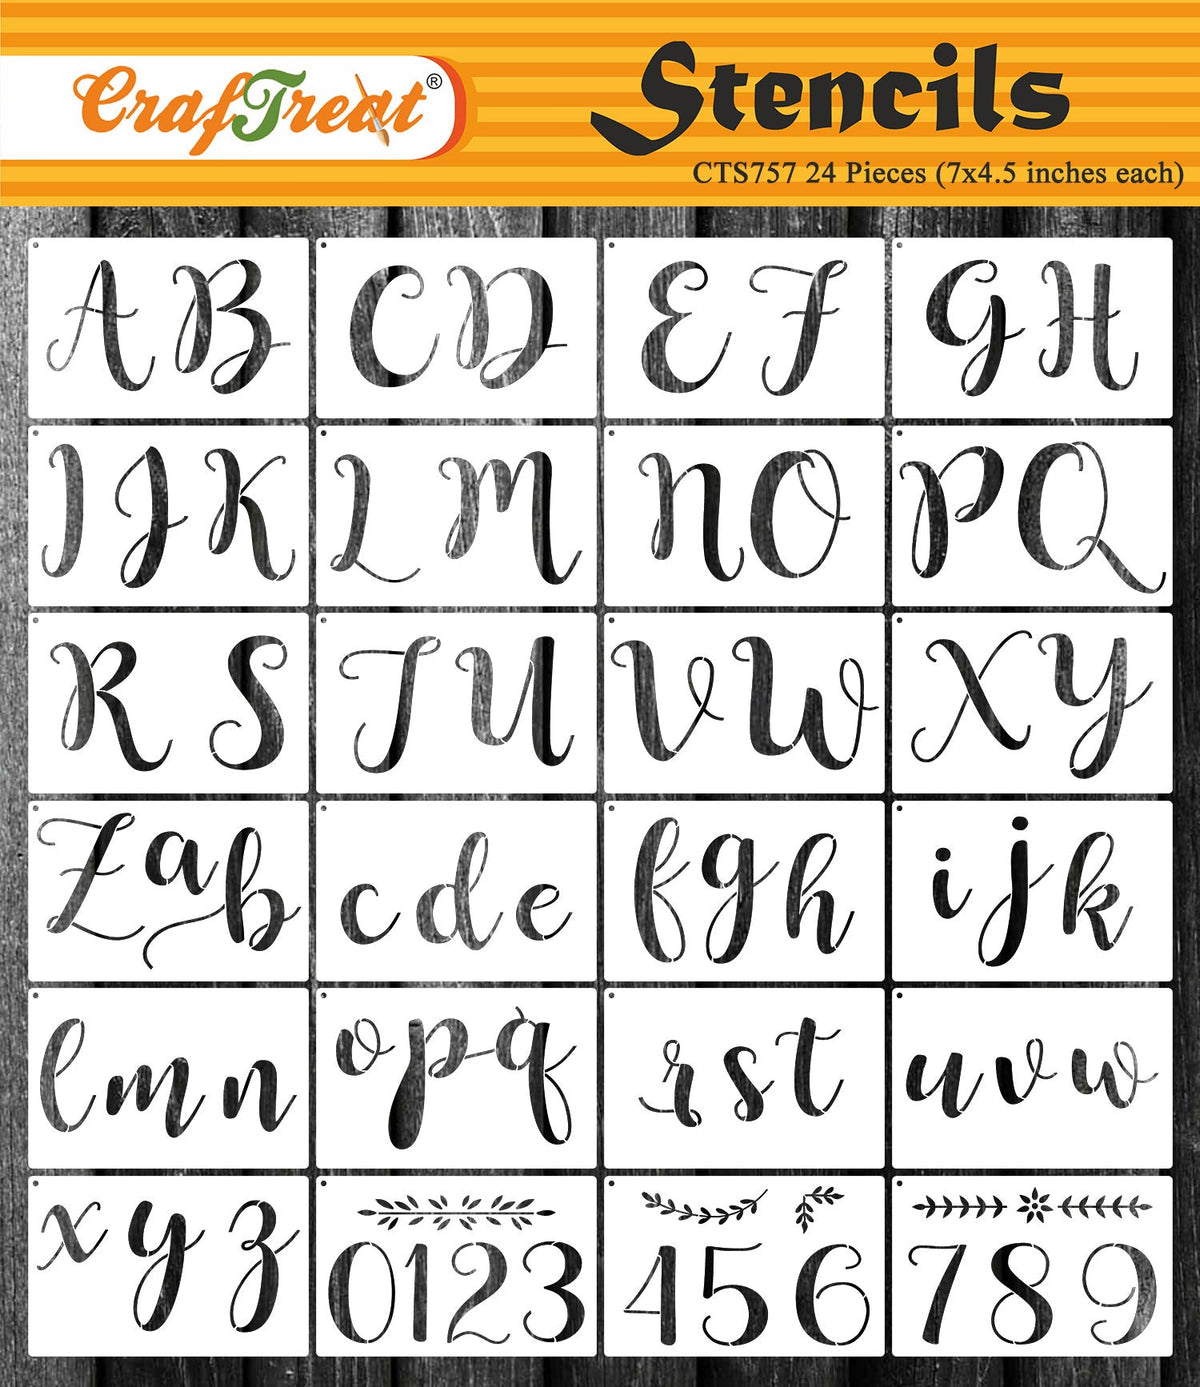 Numbers & Symbols Stencils, Reusable & Self Adhesive 6 x 6 inch Sheet, NEW